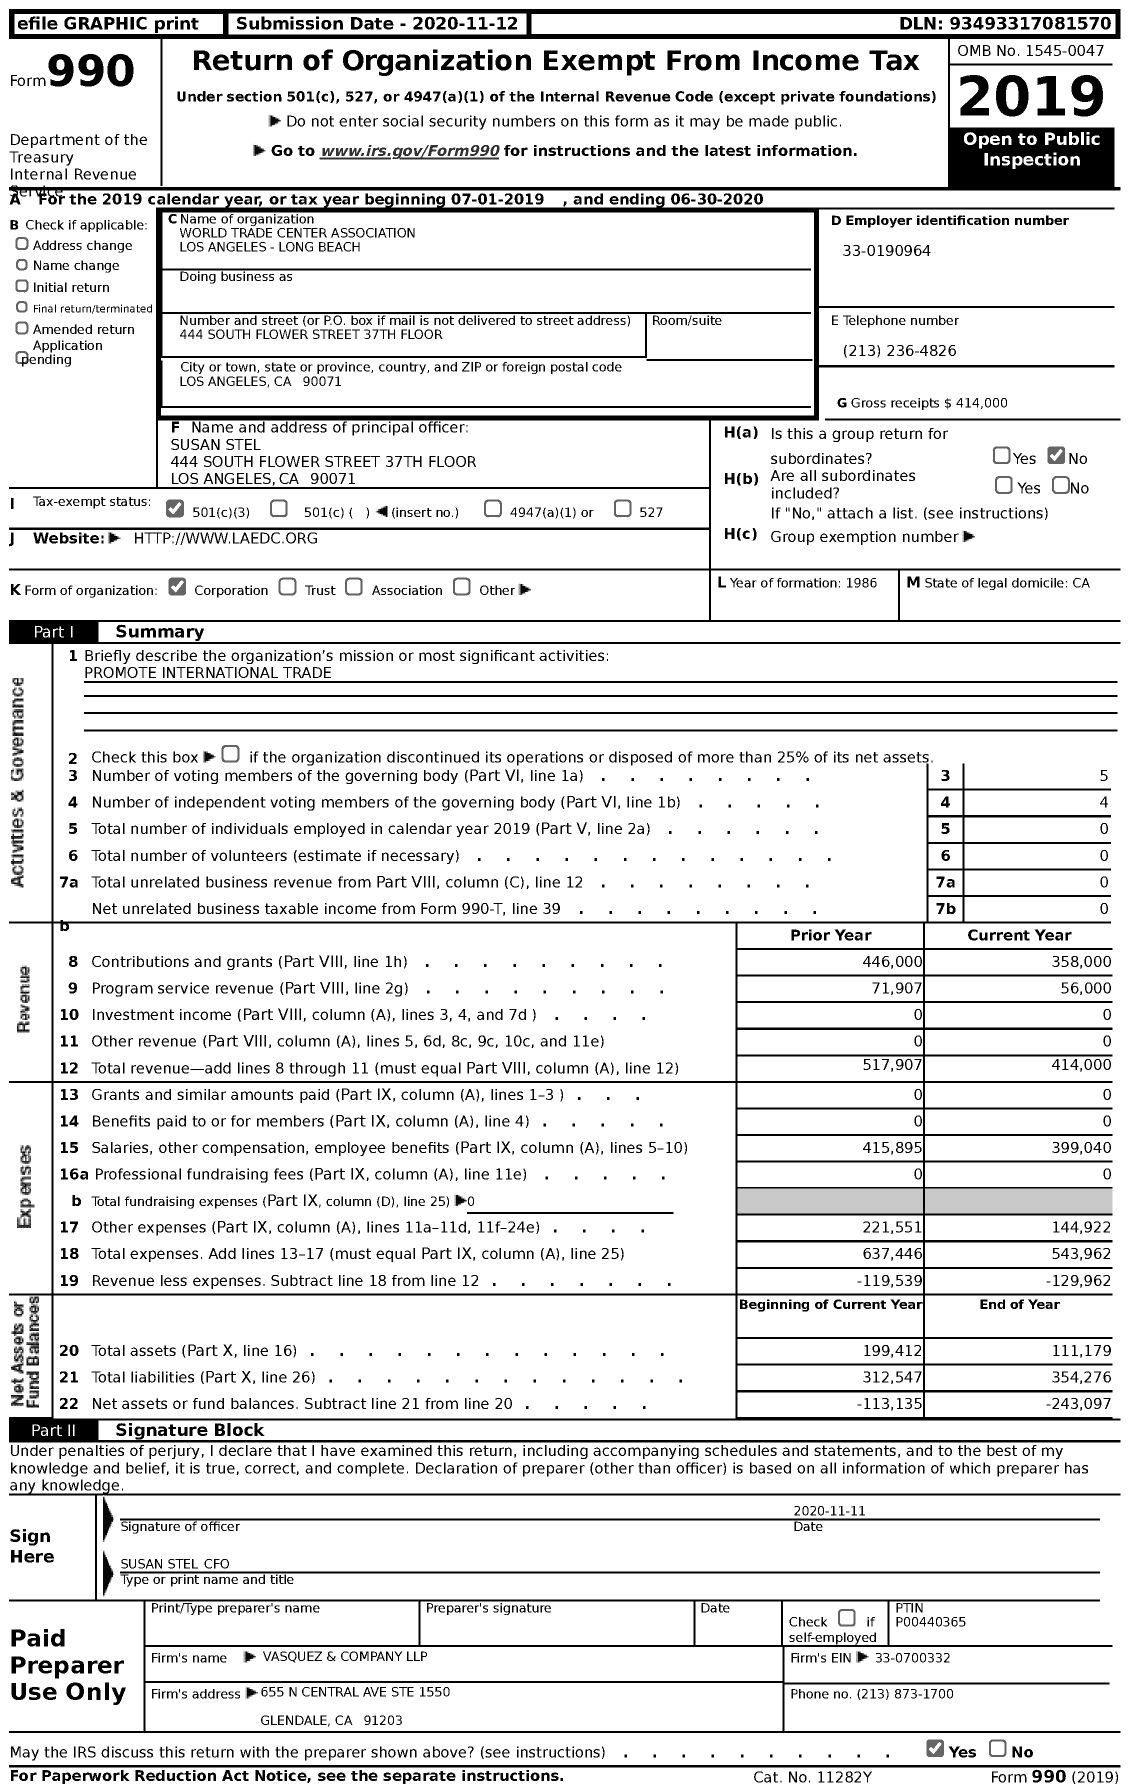 Image of first page of 2019 Form 990 for World Trade Center Association Los Angeles - Long Beach